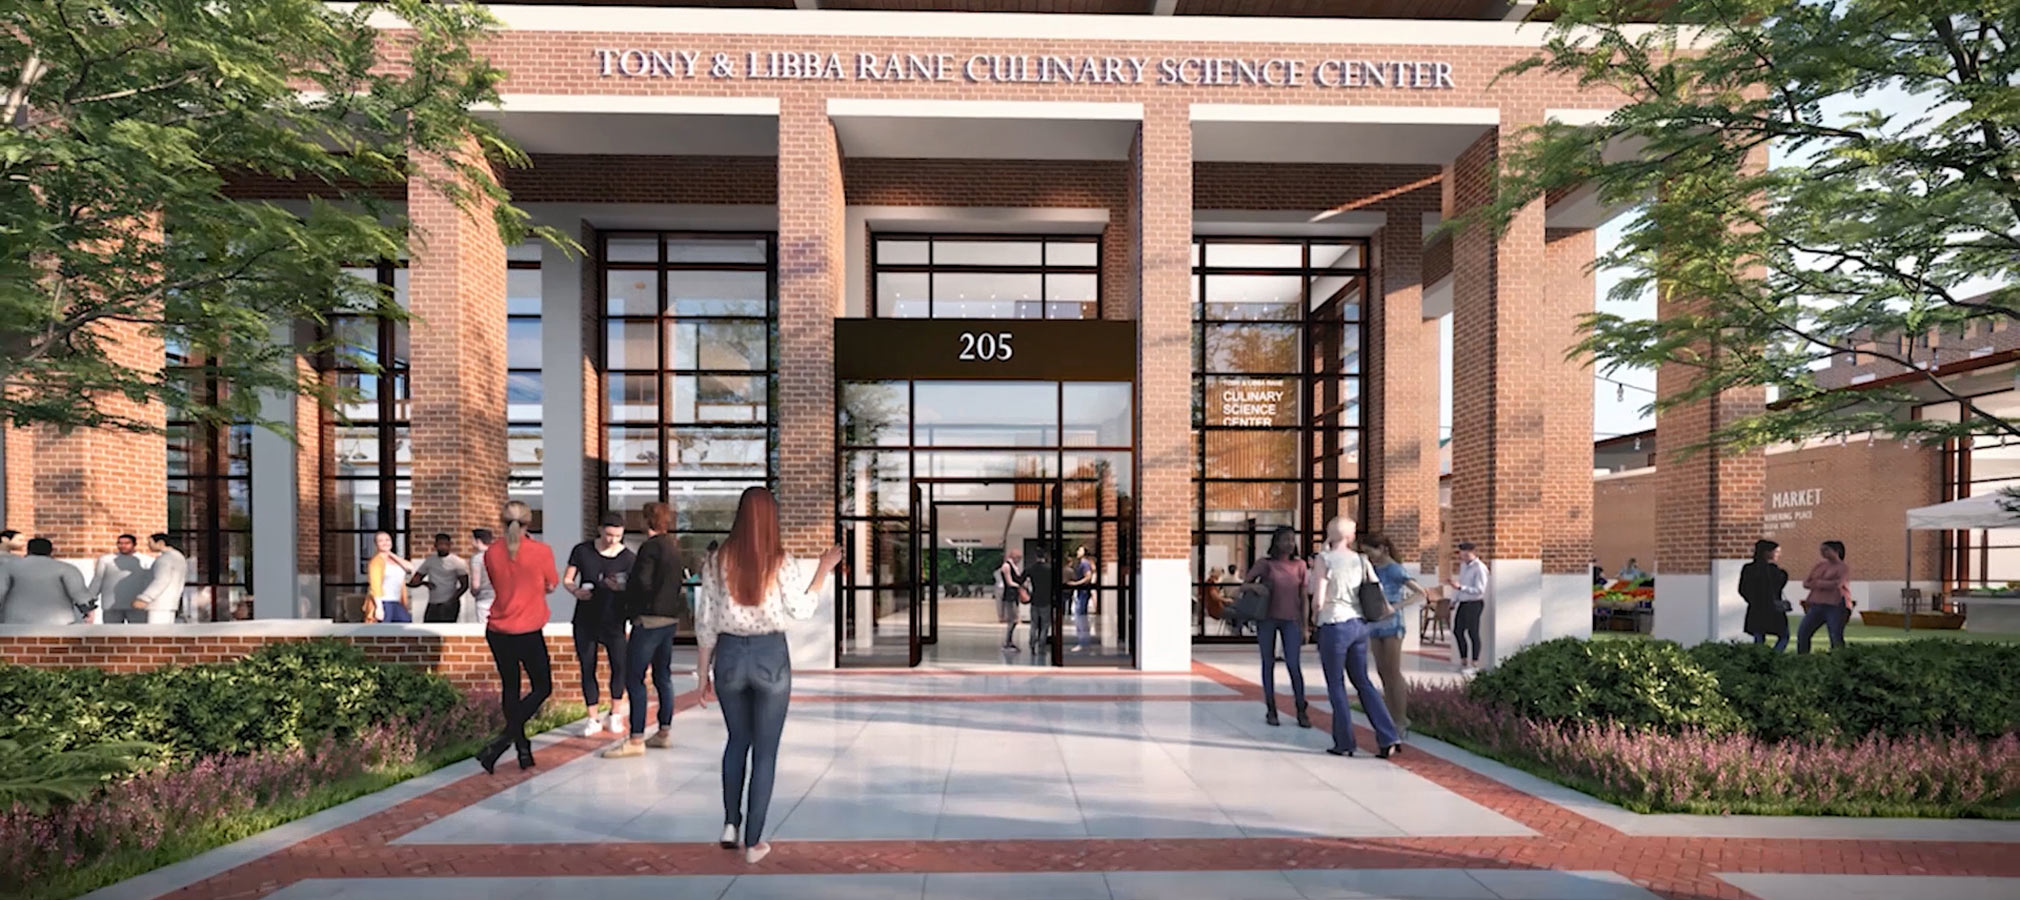 The entrance of the new Rane Culinary Science Center.